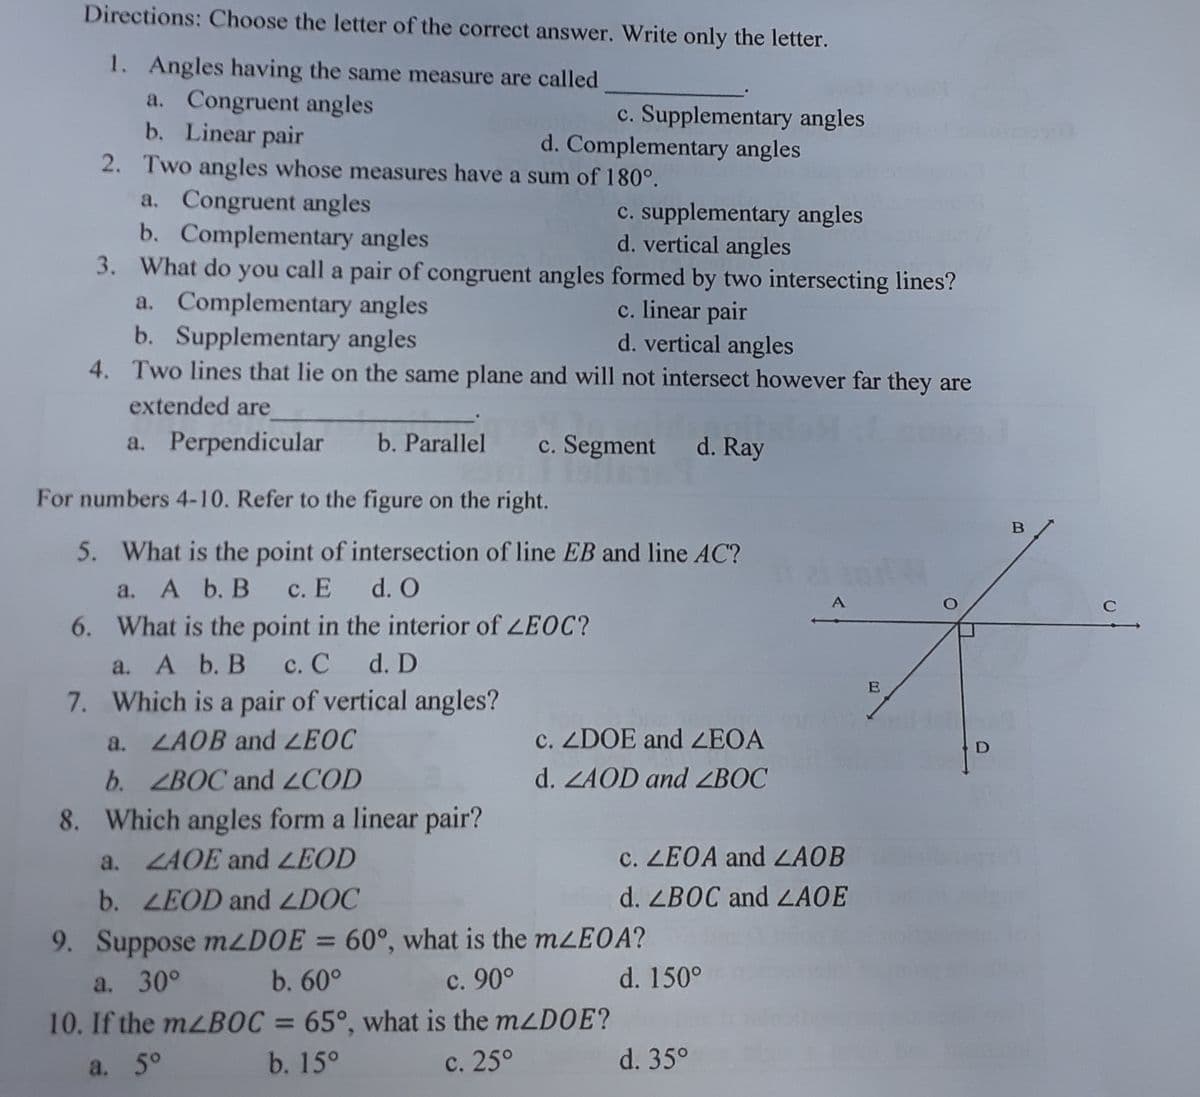 Directions: Choose the letter of the correct answer. Write only the letter.
1. Angles having the same measure are called
a. Congruent angles
b. Linear pair
2. Two angles whose measures have a sum of 180°.
c. Supplementary angles
d. Complementary angles
a. Congruent angles
b. Complementary angles
3. What do you call a pair of congruent angles formed by two intersecting lines?
a. Complementary angles
b. Supplementary angles
4. Two lines that lie on the same plane and will not intersect however far they are
c. supplementary angles
d. vertical angles
c. linear pair
d. vertical angles
extended are
a. Perpendicular
b. Parallel
c. Segment d. Ray
For numbers 4-10. Refer to the figure on the right.
5. What is the point of intersection of line EB and line AC?
c. E d. O
6. What is the point in the interior of LEOC?
a. A b. B
с. С
7. Which is a pair of vertical angles?
a. A b. B
d. D
E
a. LAOB and LEOC
c. ZDOE and ZEOA
b. ZBOC and ZCOD
d. ZAOD and ZBOC
8. Which angles form a linear pair?
a. ZAOE and LEOD
c. LEOA and ZAOB
b. LEOD and LDOC
d. ZBOC and LAOE
9. Suppose mzDOE
60°, what is the mzEOA?
%3D
a. 30°
b. 60°
с. 90°
d. 150°
10. If the mzBOC =
65°, what is the mzDOE?
%3D
a. 5°
b. 15°
с. 25°
d. 35°
B.
